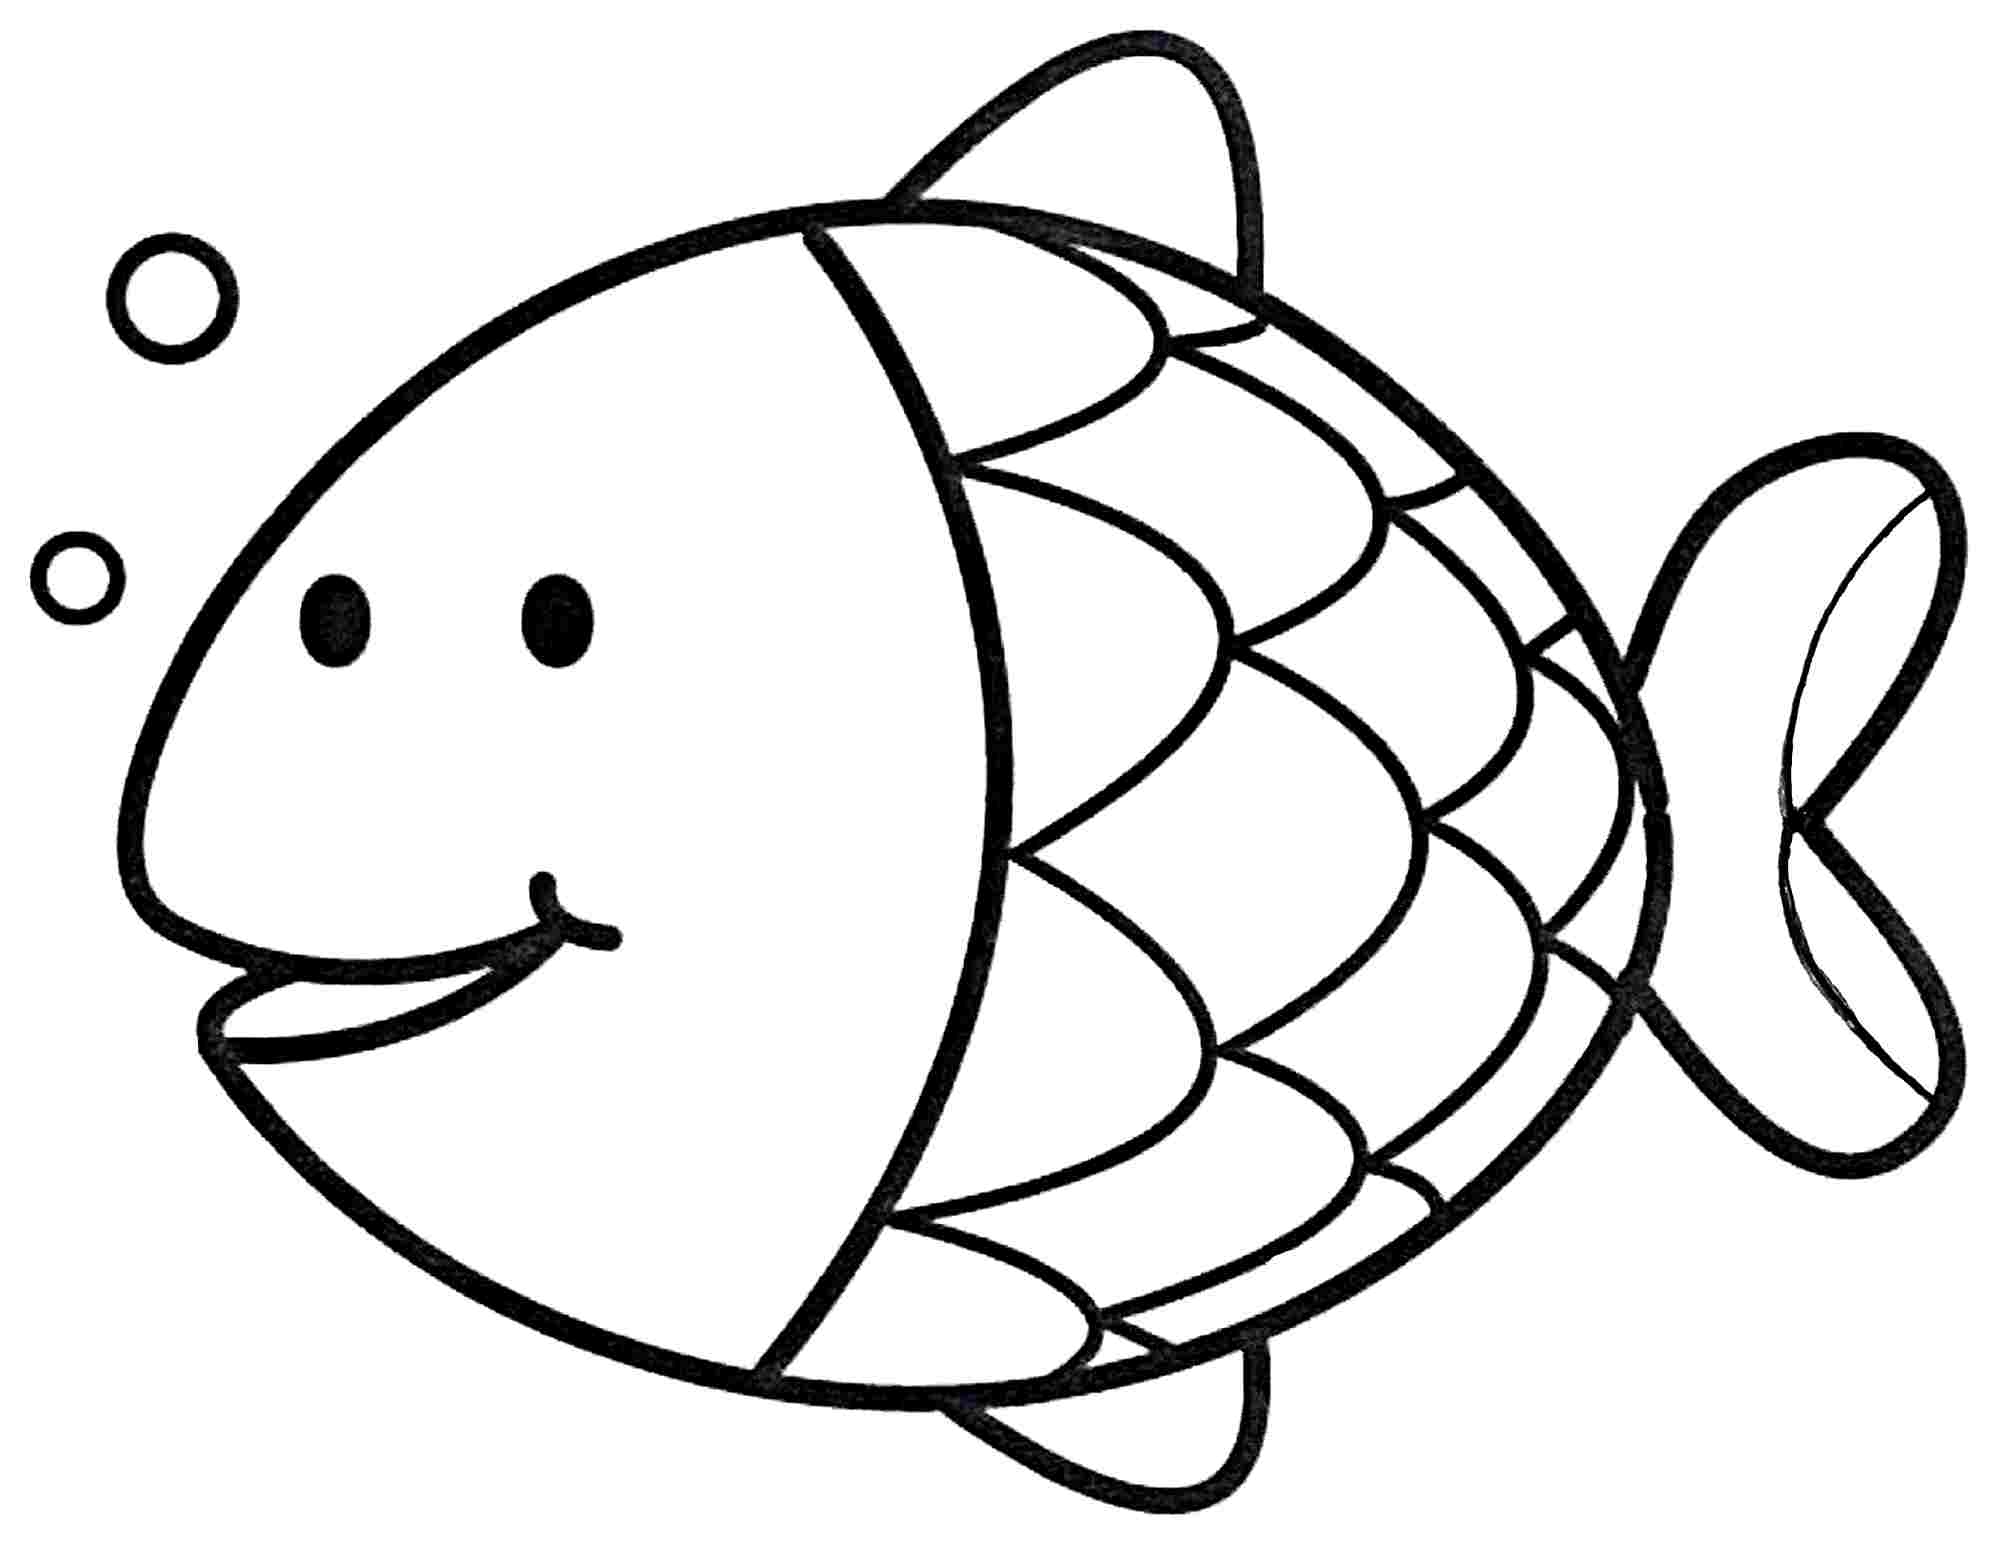 Tag: fish coloring page template - Kids Coloring Pages